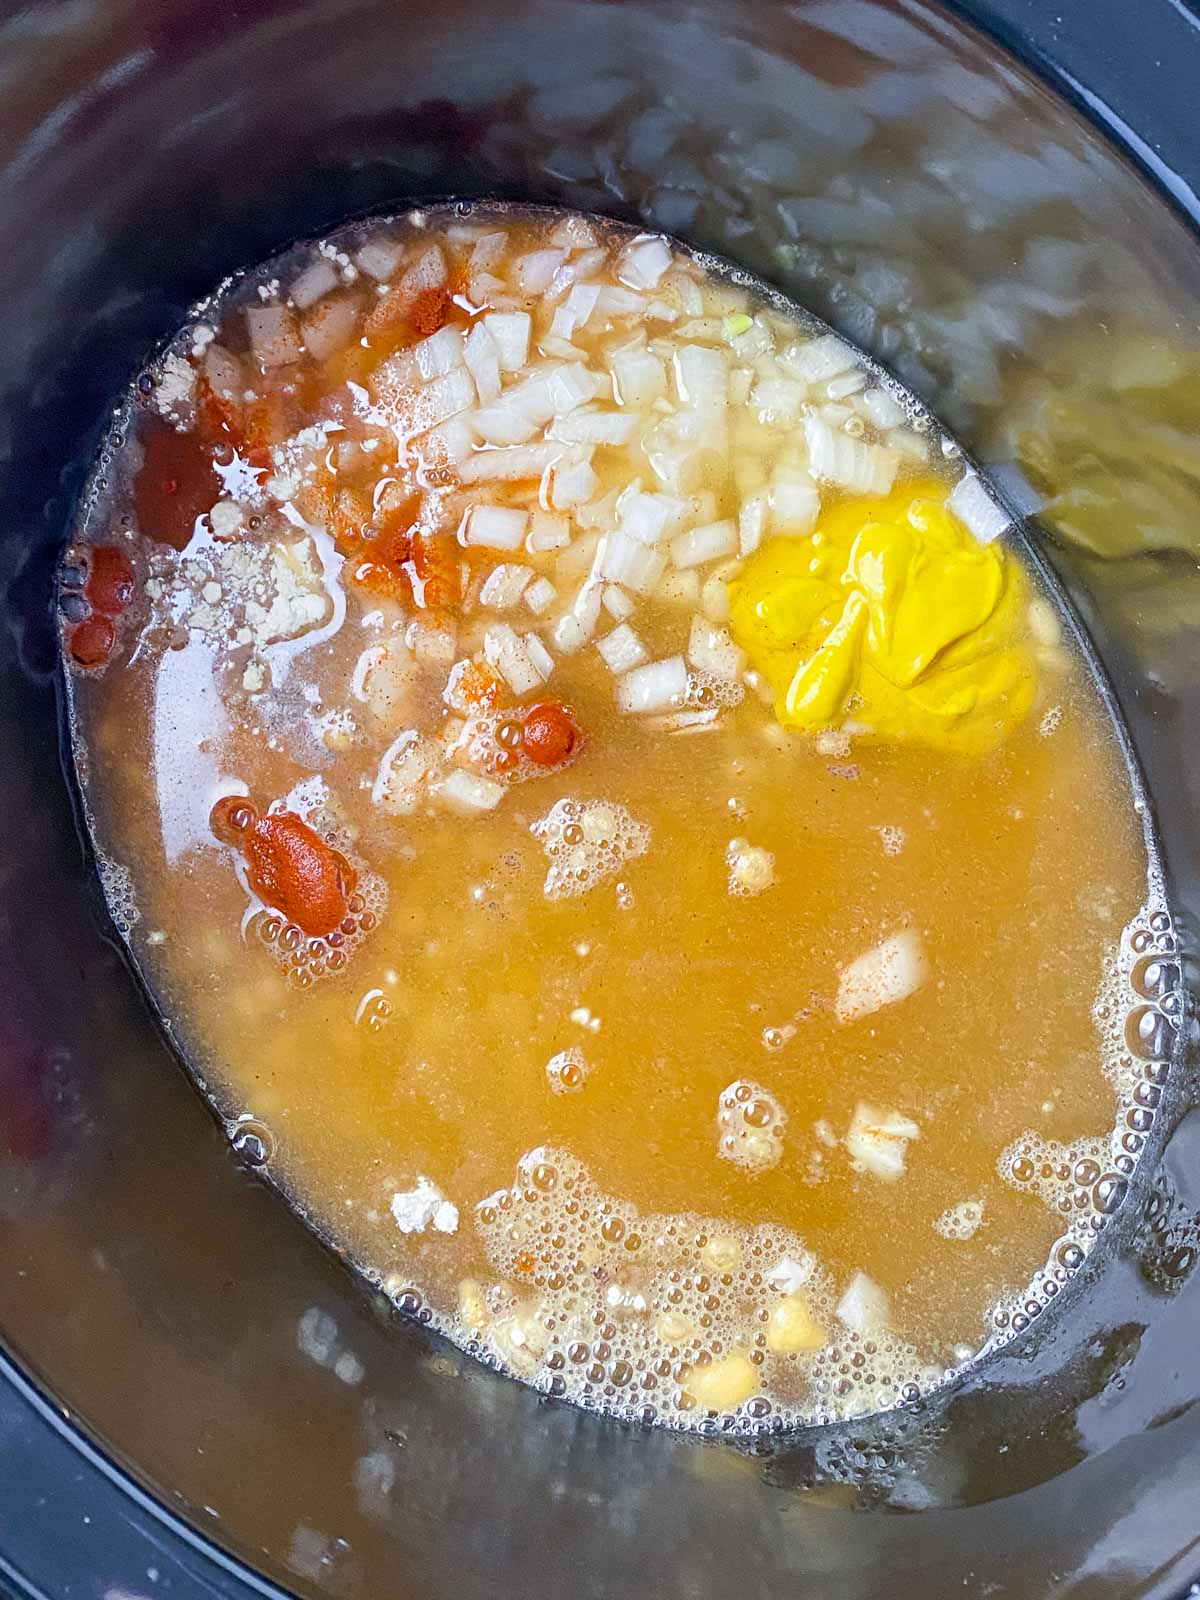 Vegetable broth added to baked beans ingredients in crockpot.